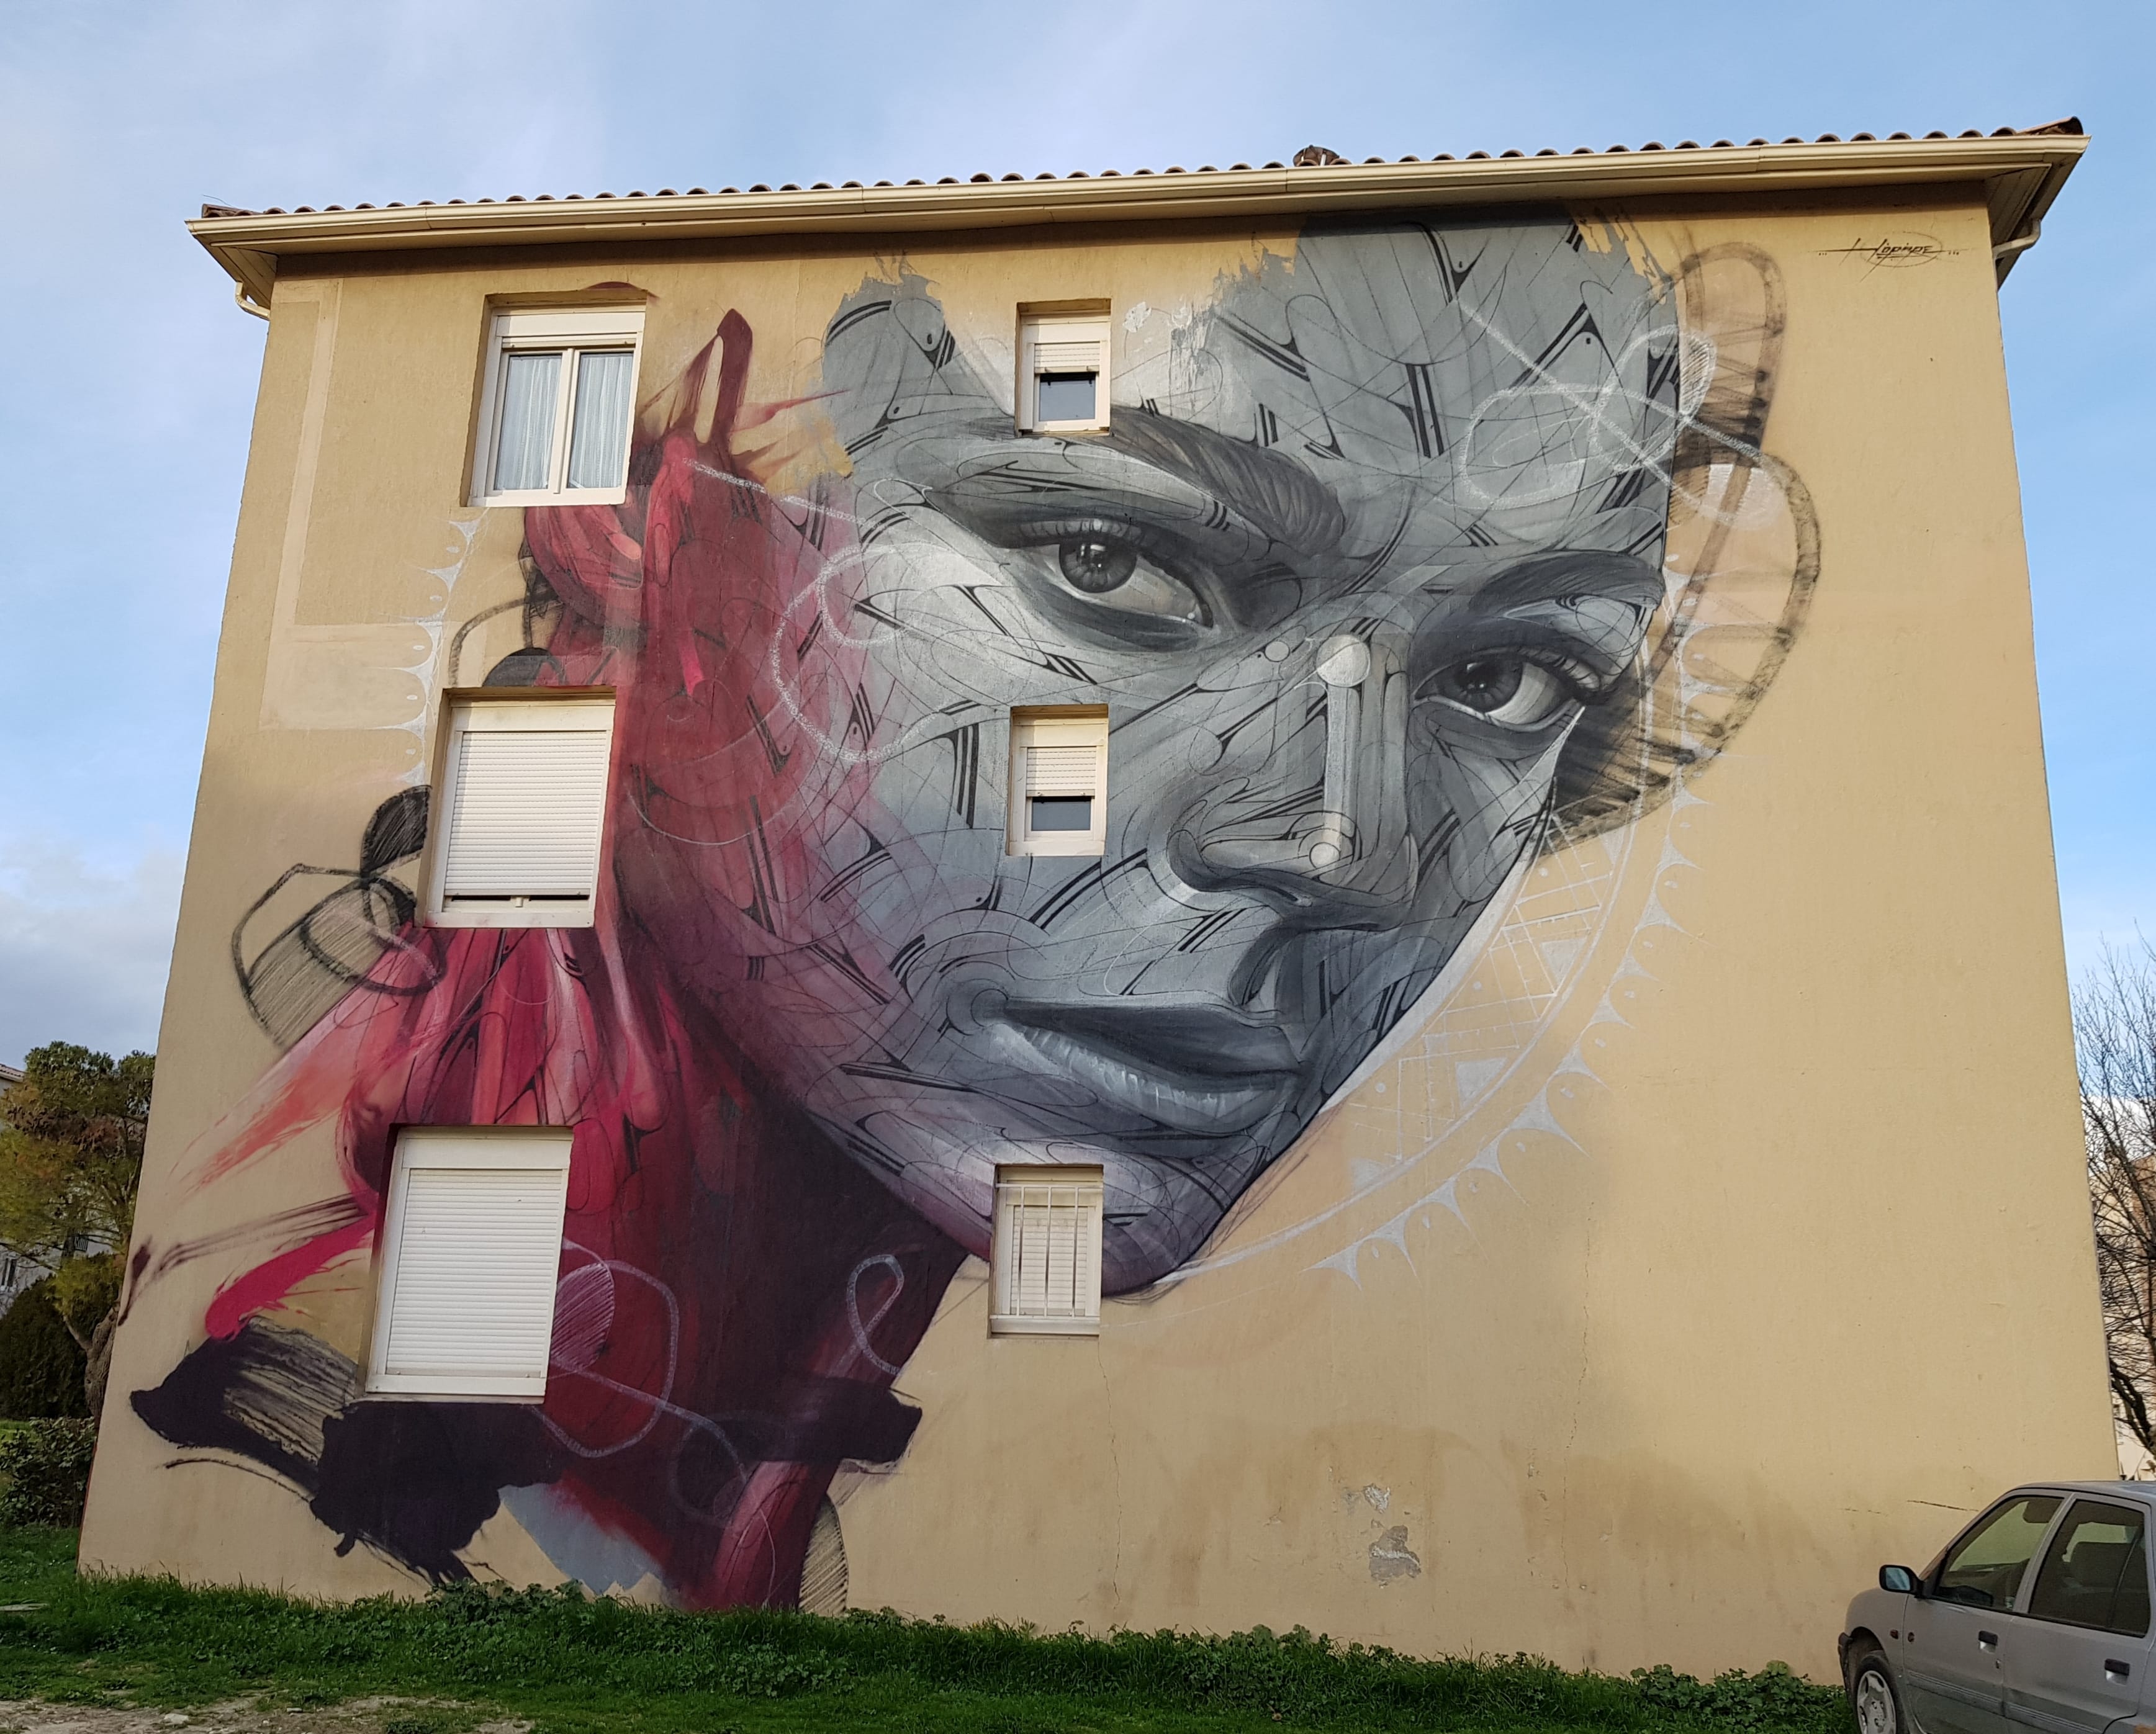 Graffiti 6321  by the artist Hopare captured by Mephisroth in Uzès France